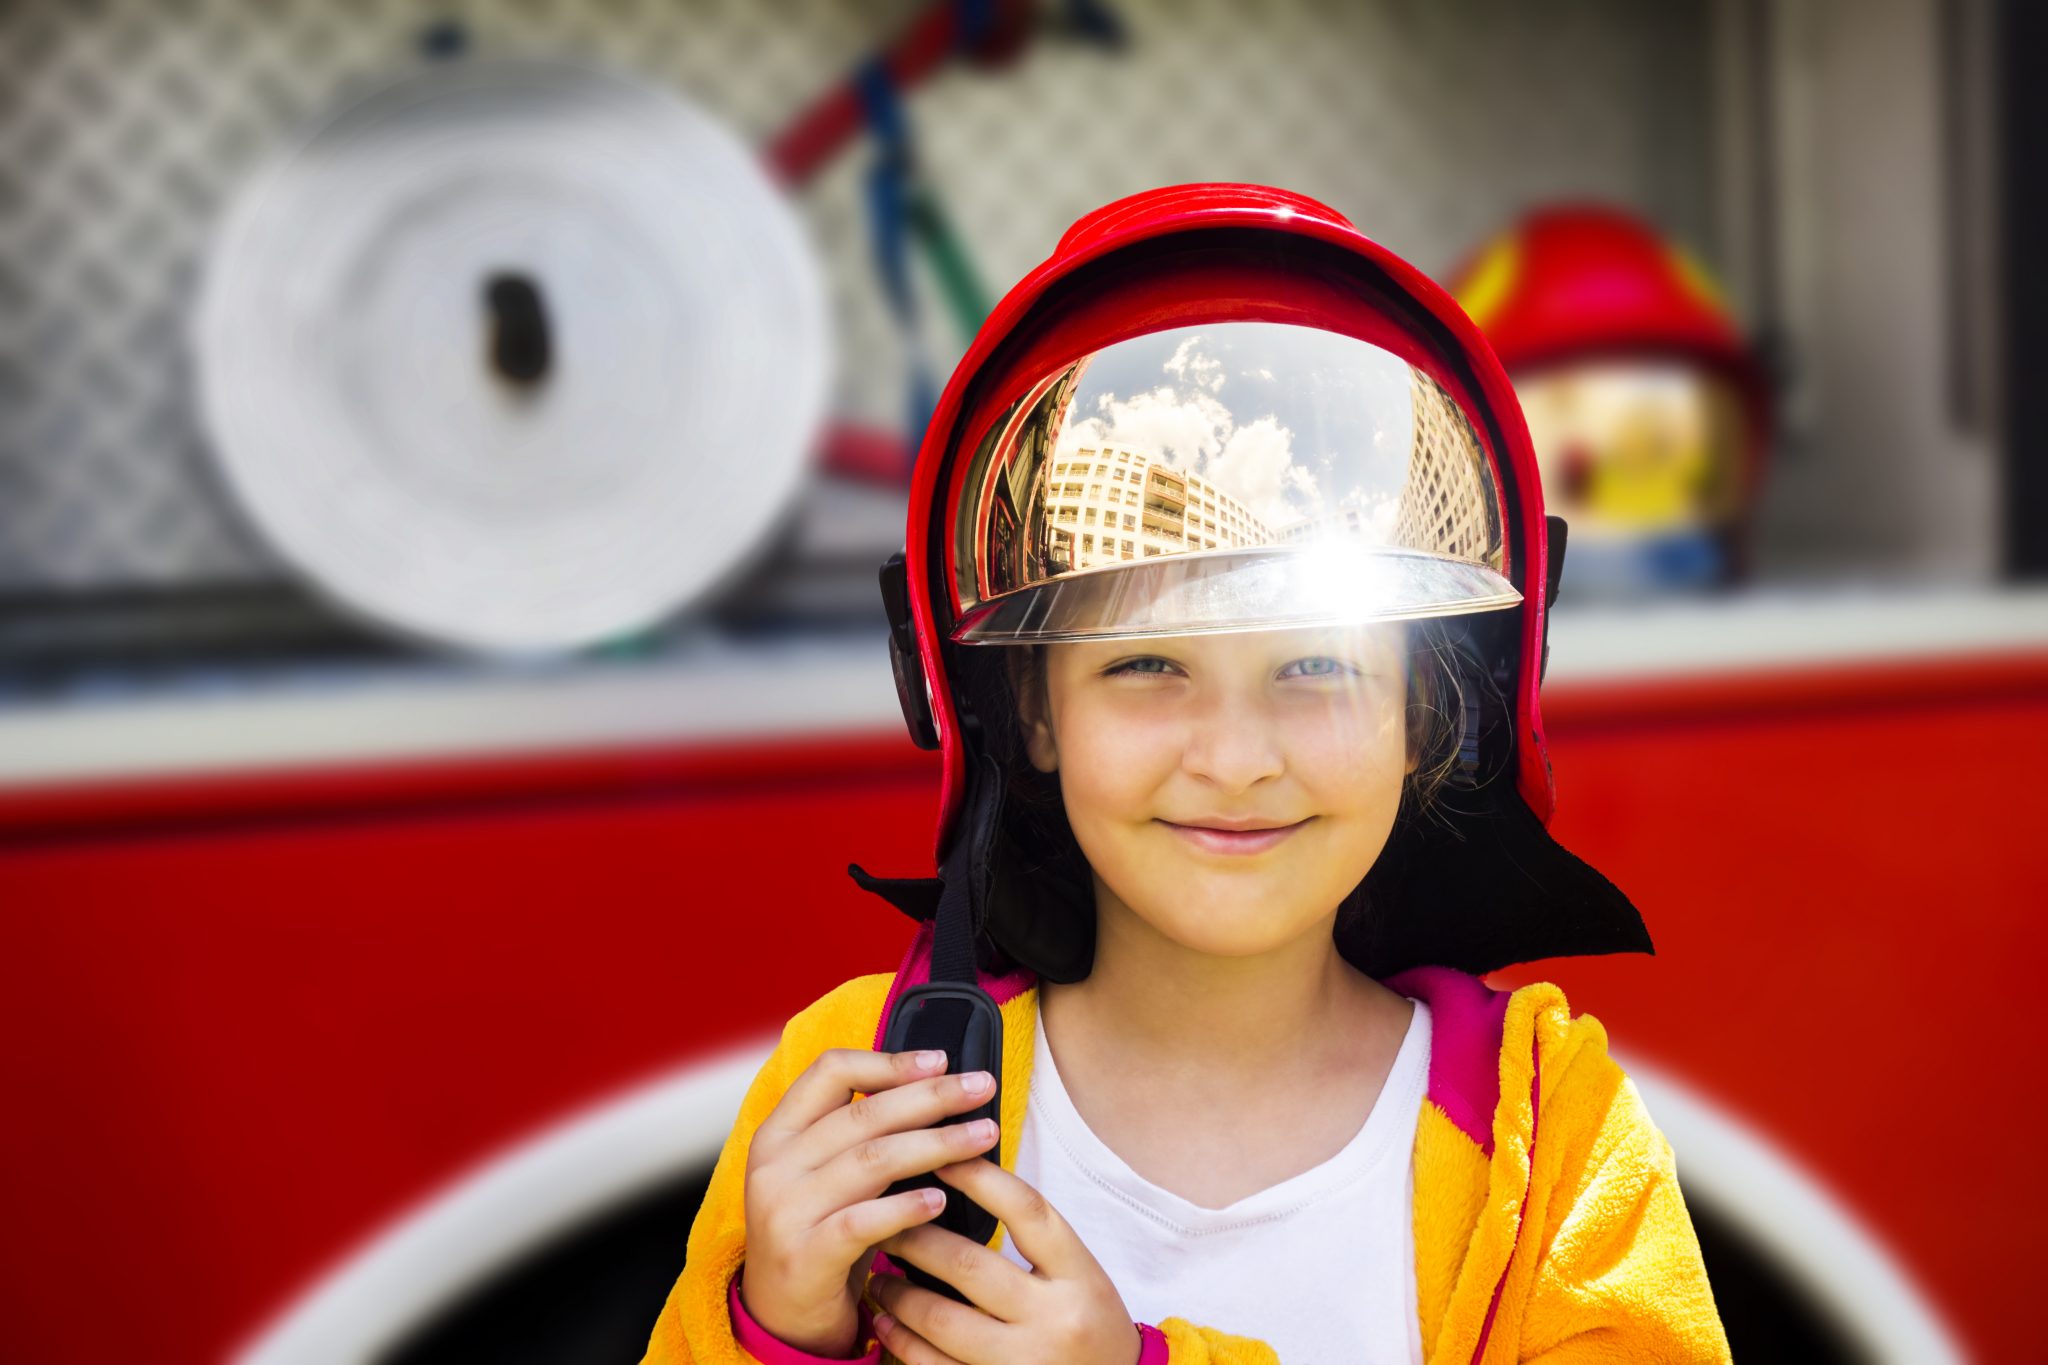 Mum vents about people questioning her daughter’s firefighter costume